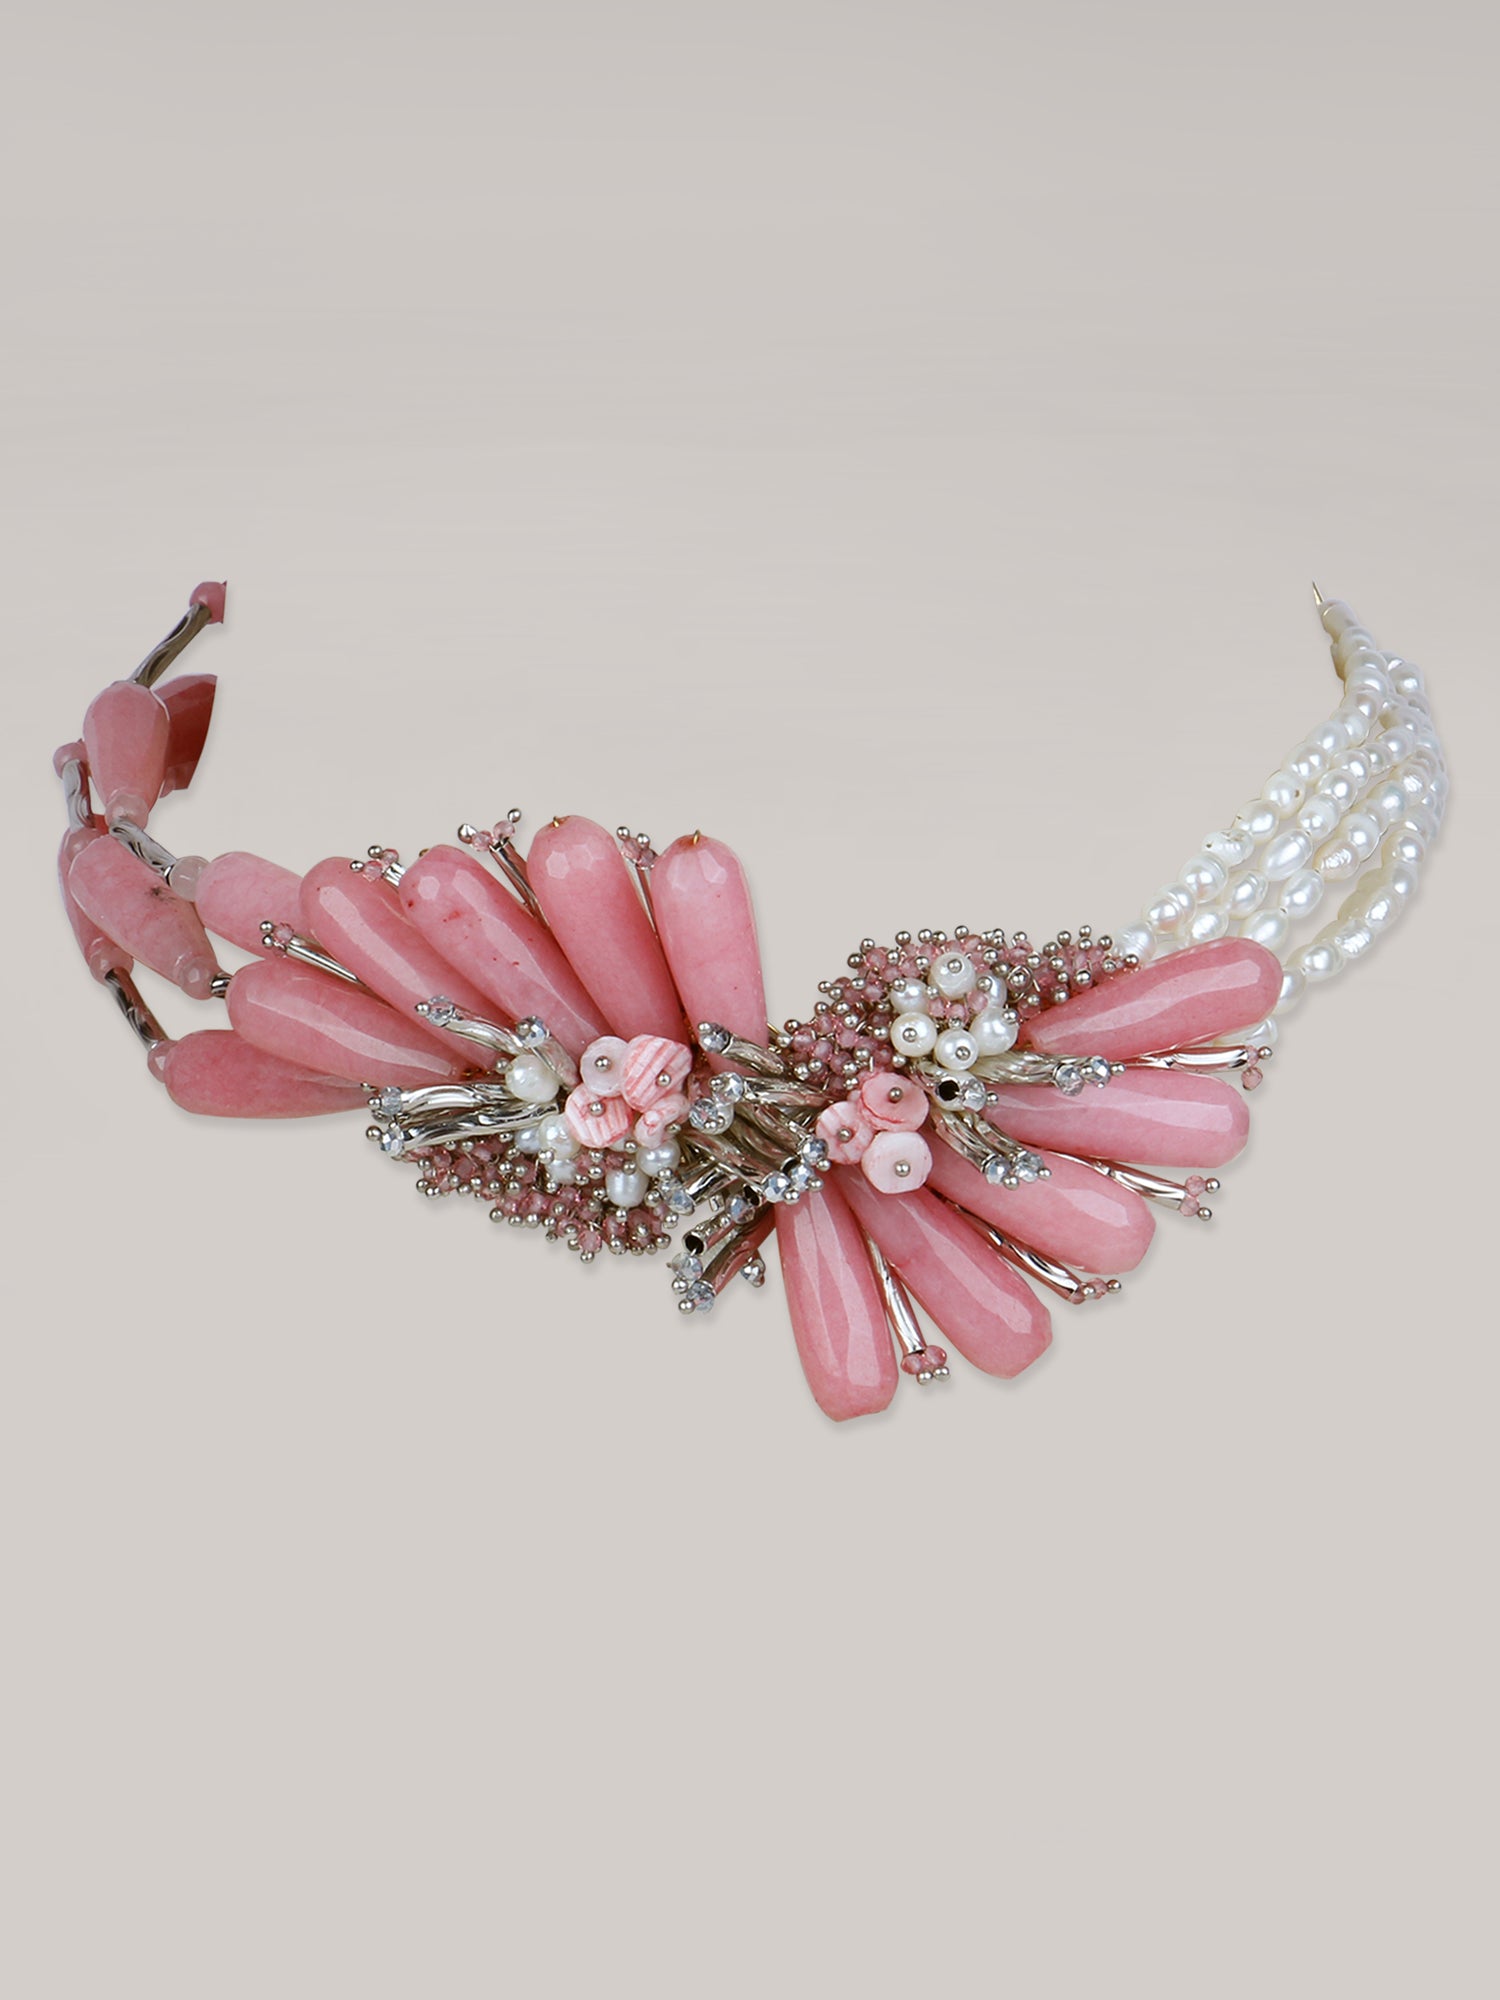 PHILODENDRON PINK CHOKER - House of Doro